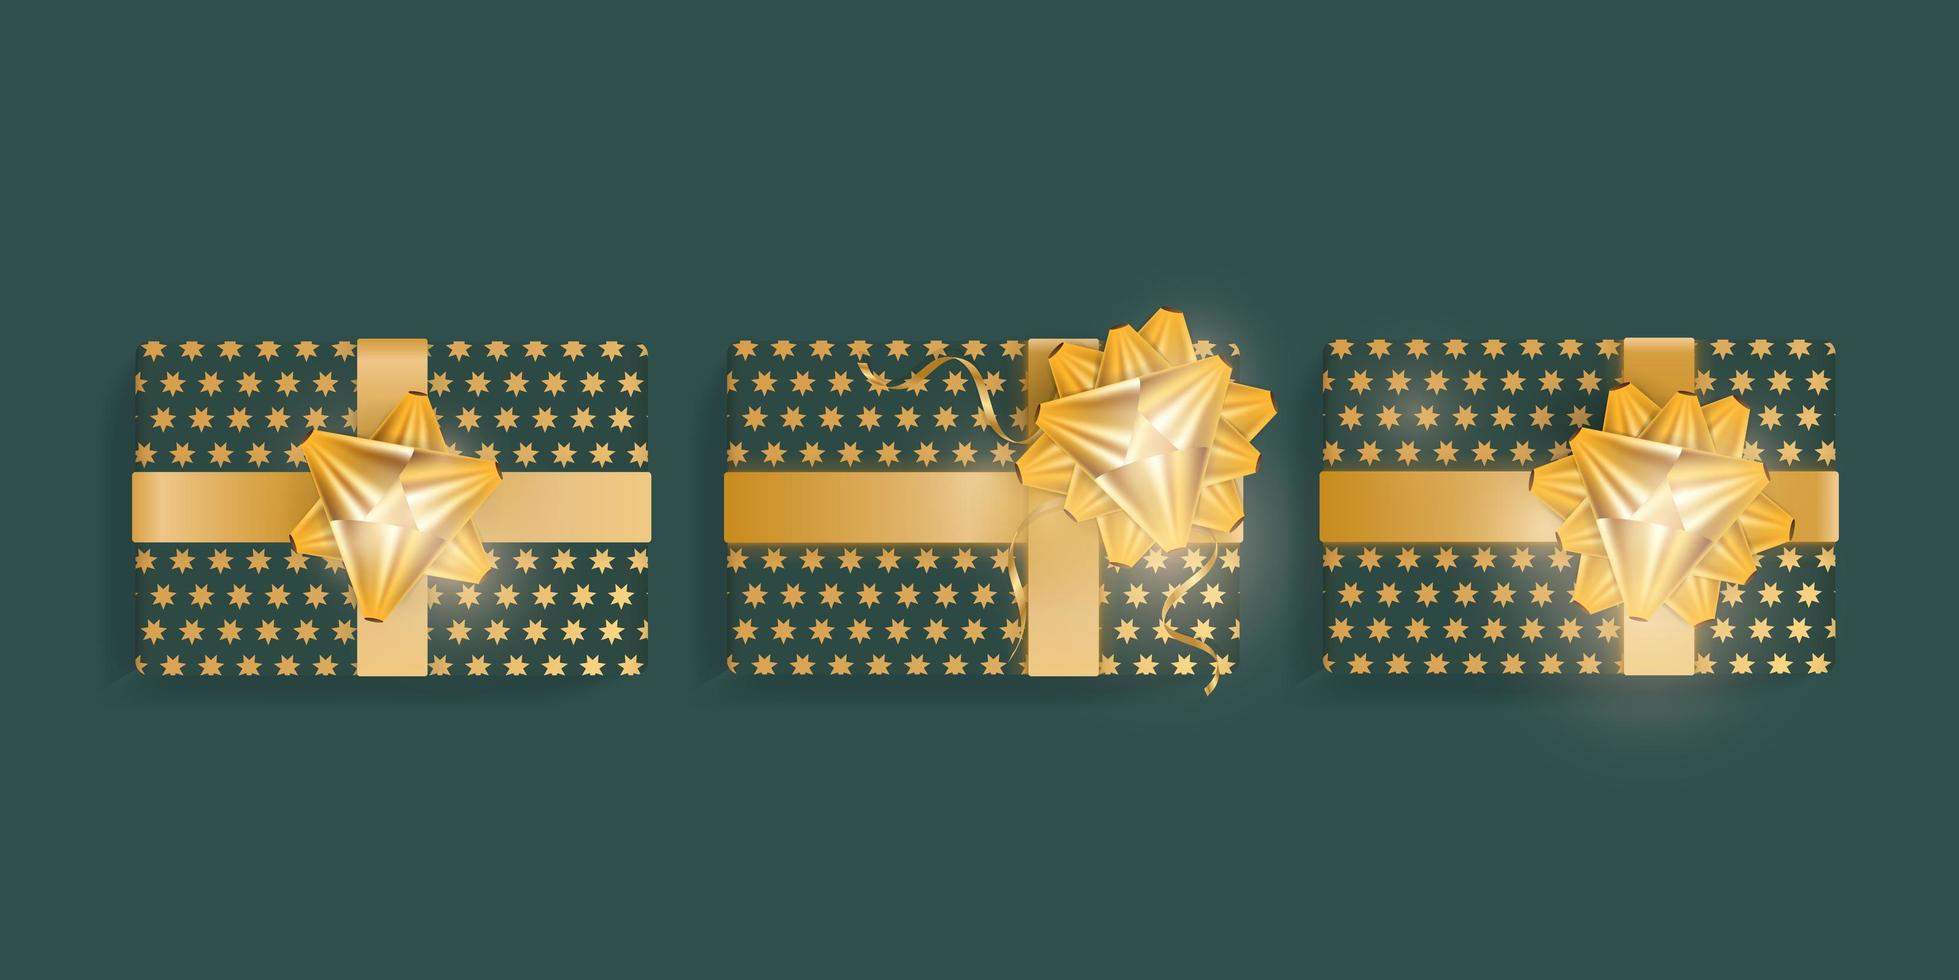 Set of Realistic Green Gift Boxes with Gold Stars, Gold Ribbons and Bow. View from above. Vector illustration.